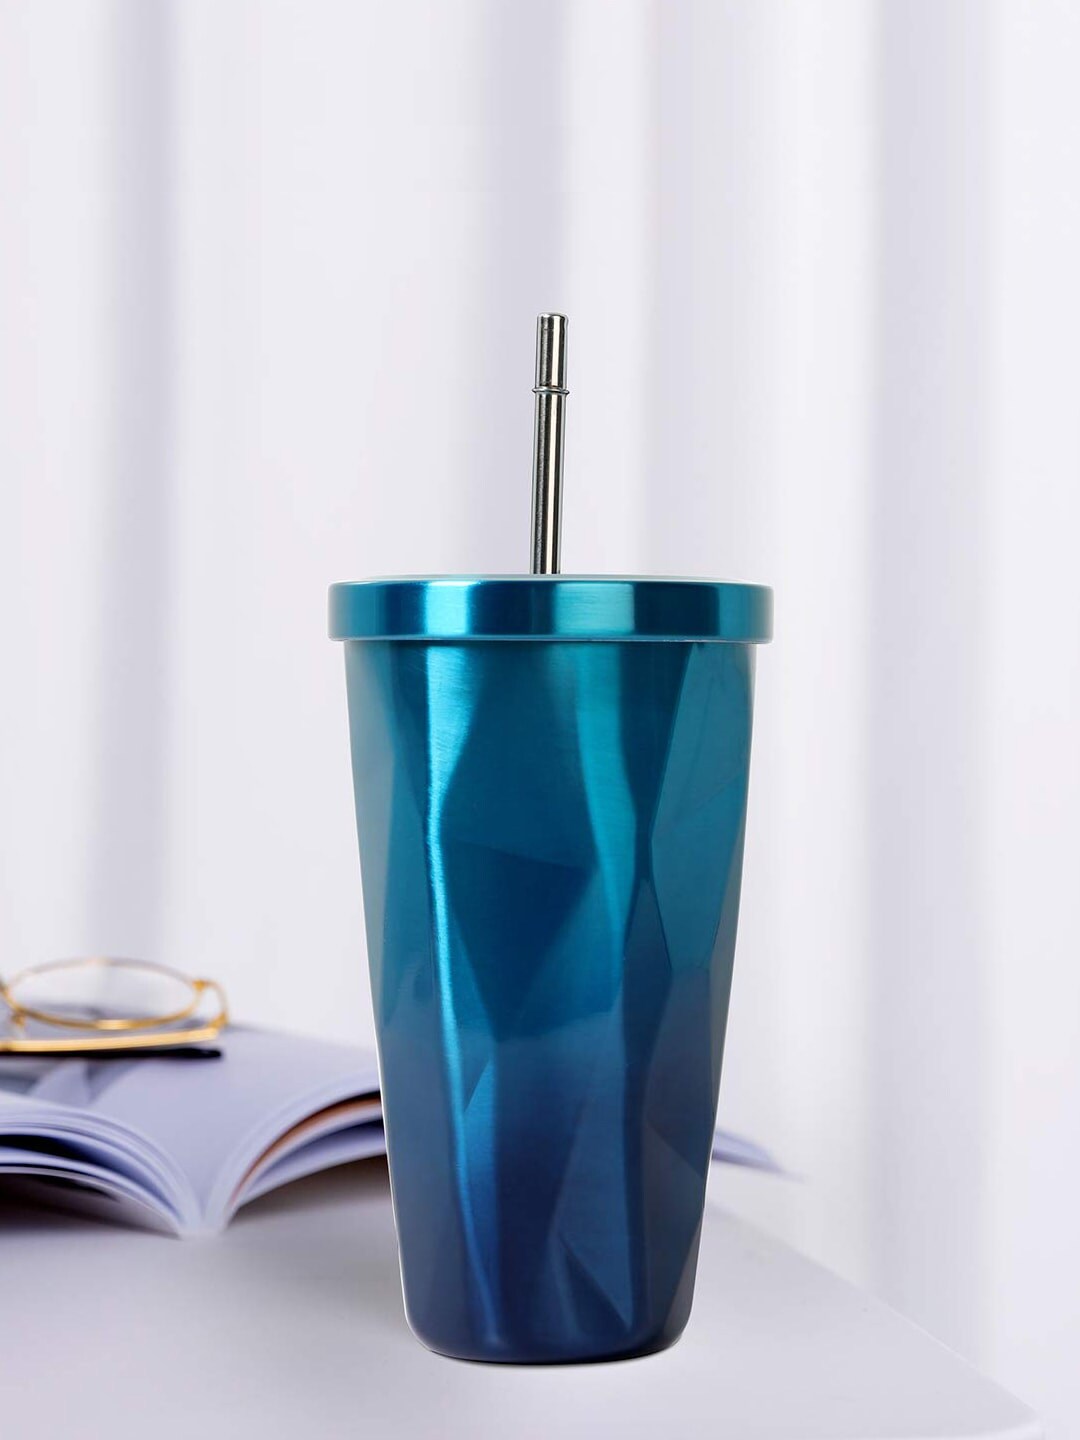 INCRIZMA Teal Blue Solid Stainless Steel Mugs Set Price in India